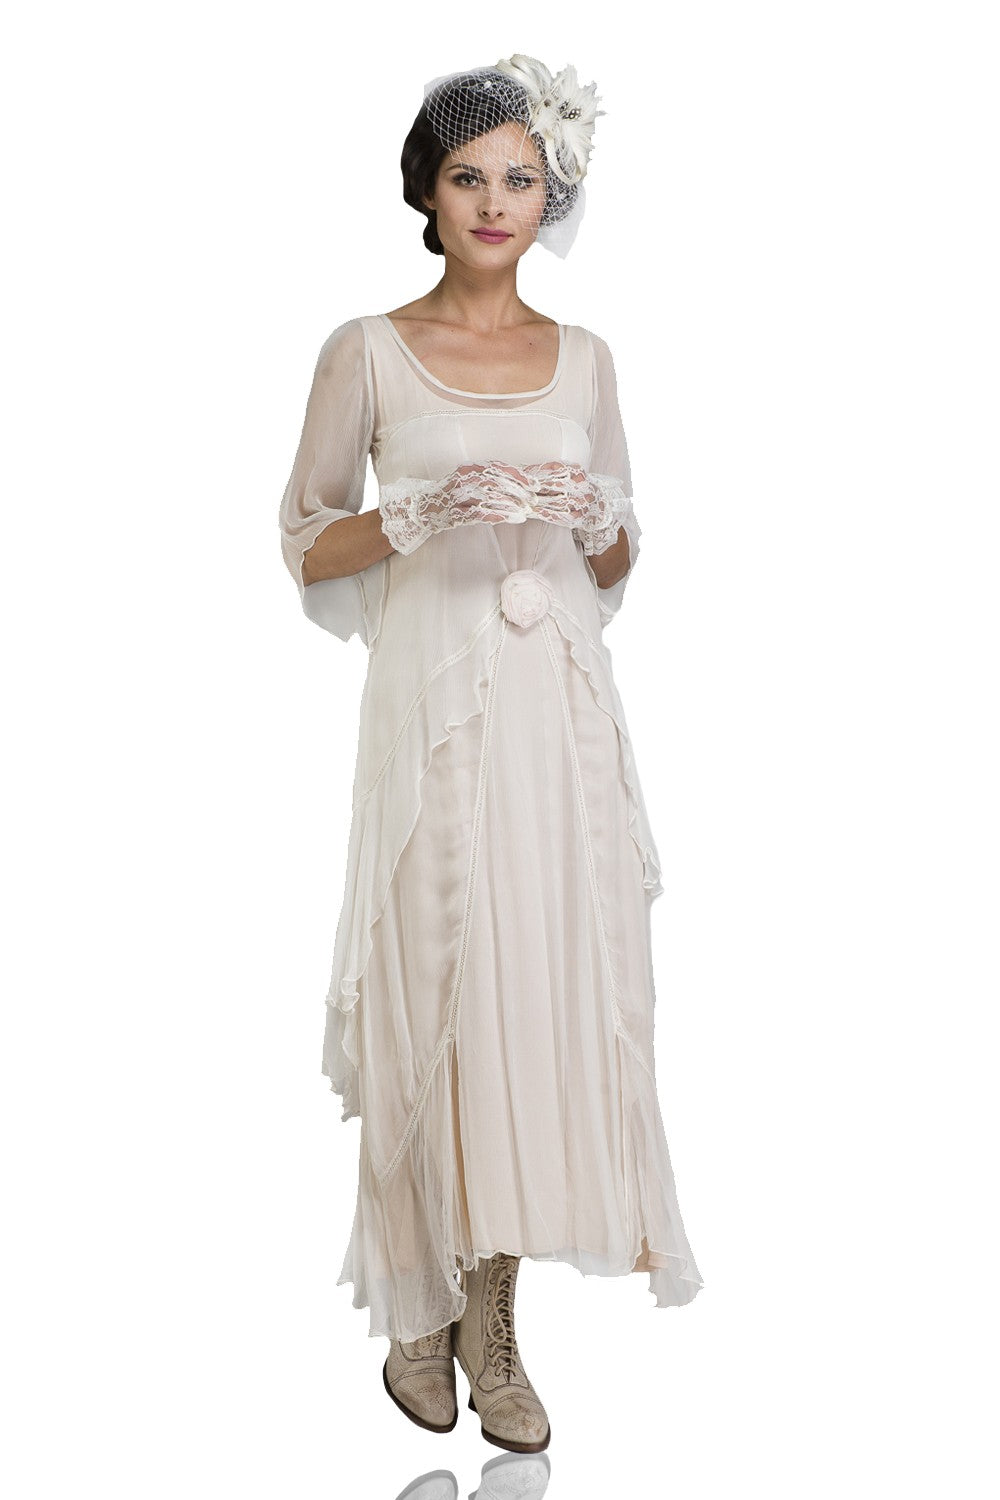 20s Dresses | 1920s Dresses for Sale Great Gatsby Party Dress in Ivory by Nataya $249.00 AT vintagedancer.com